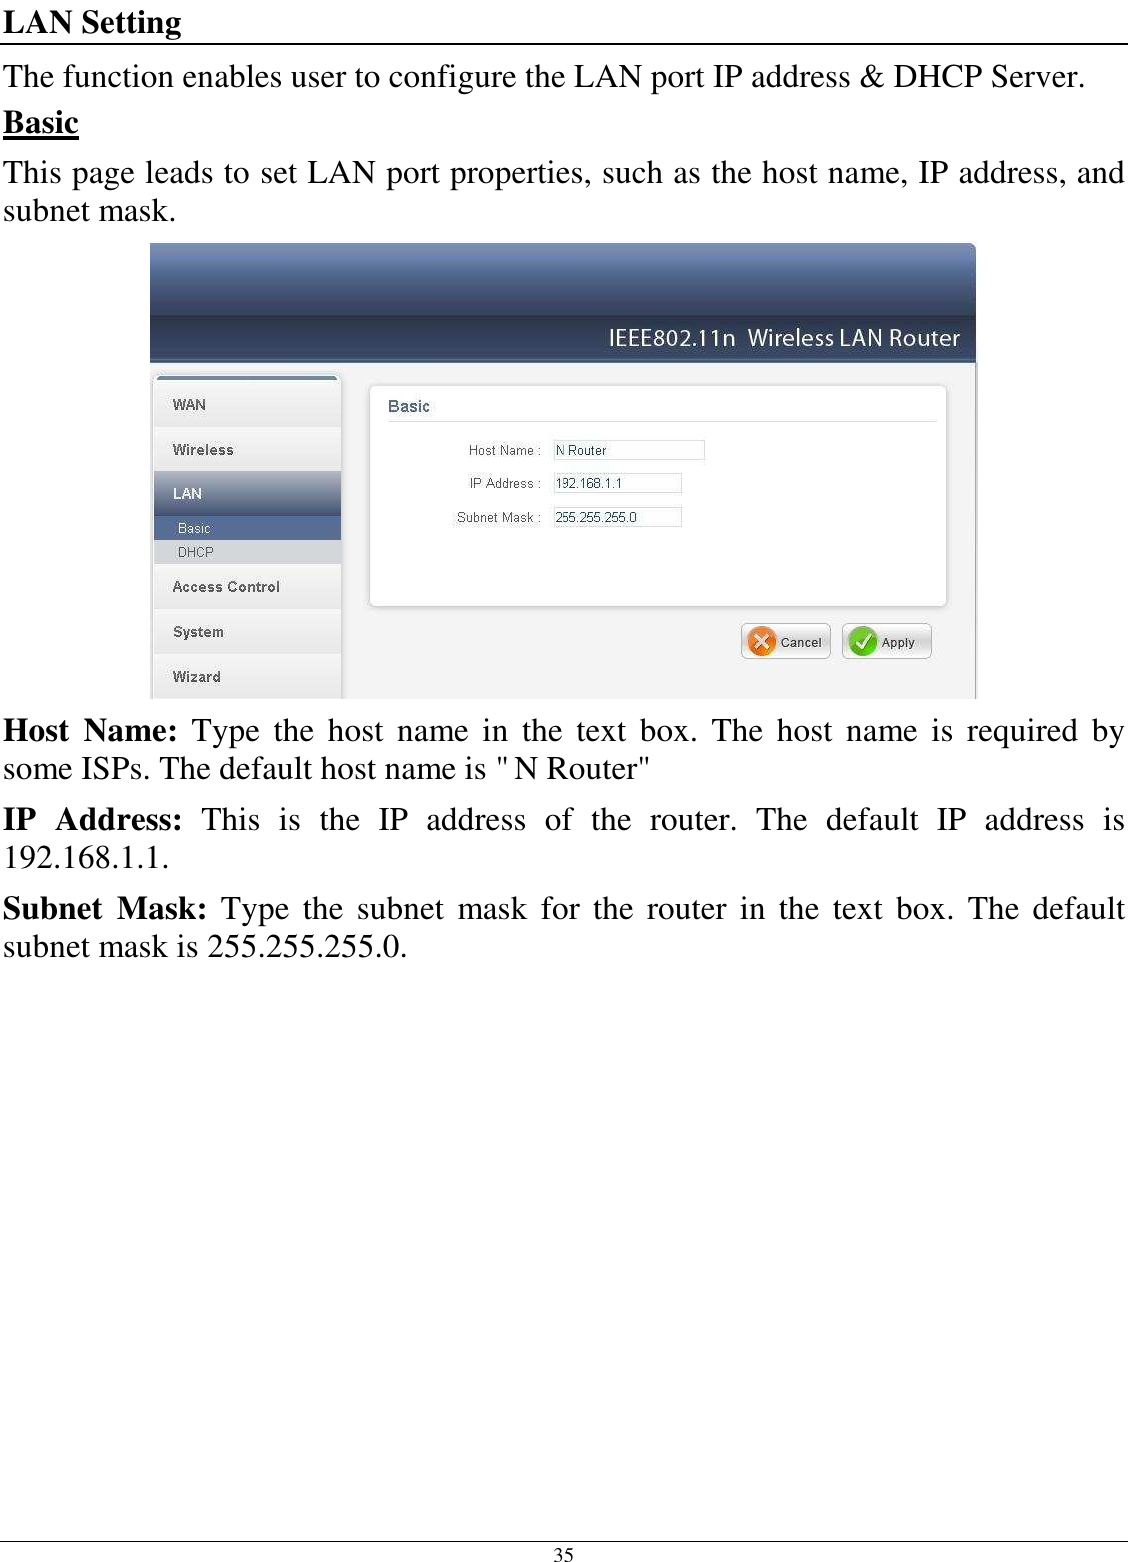 35 LAN Setting The function enables user to configure the LAN port IP address &amp; DHCP Server. Basic This page leads to set LAN port properties, such as the host name, IP address, and subnet mask.  Host  Name:  Type  the  host  name  in  the  text  box.  The  host  name  is  required  by some ISPs. The default host name is &quot; N Router&quot; IP  Address:  This  is  the  IP  address  of  the  router.  The  default  IP  address  is 192.168.1.1. Subnet  Mask:  Type the  subnet  mask  for  the router  in the  text  box.  The default subnet mask is 255.255.255.0.   